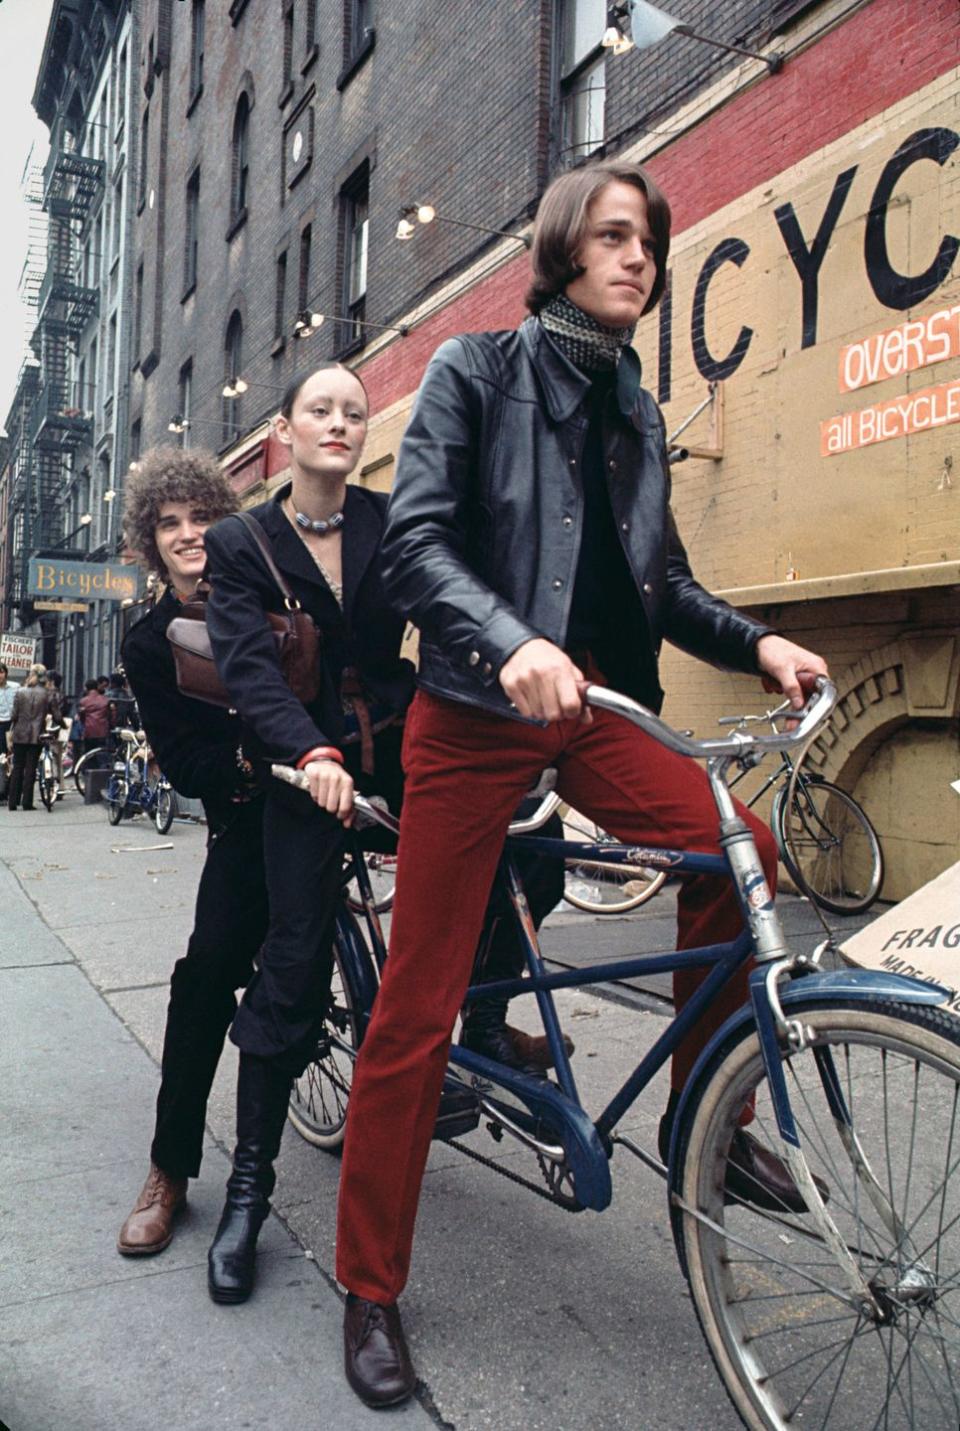 warhol superstar, model and actress jane forth photographed bicycling in new york city with twins jay and jed johnson in 1970 photo by jack mitchellgetty images